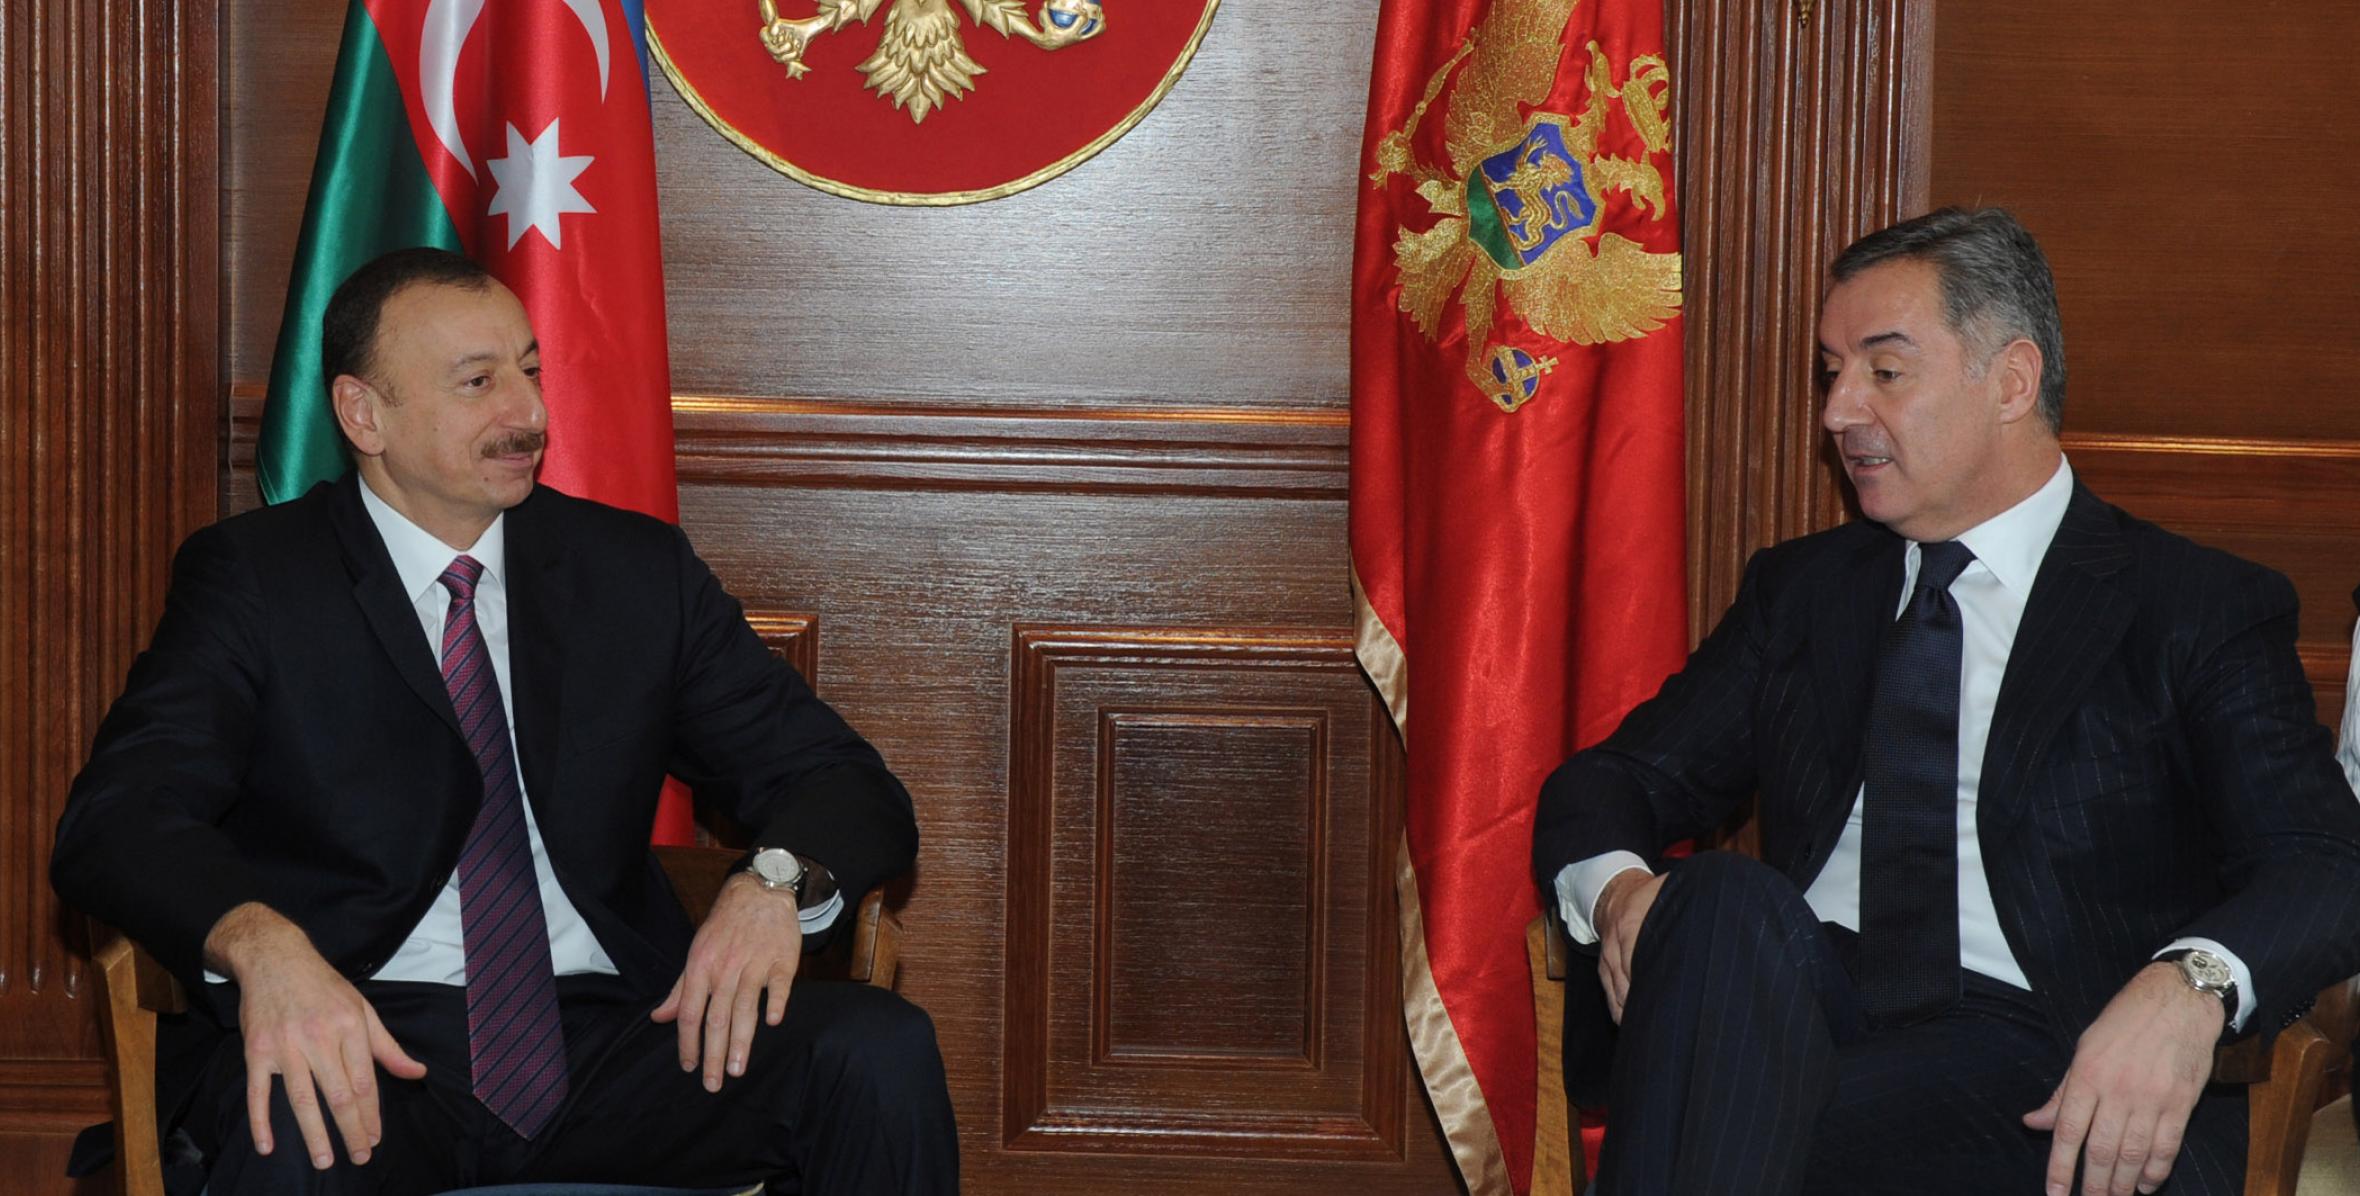 Ilham Aliyev met with the Prime Minister of Montenegro